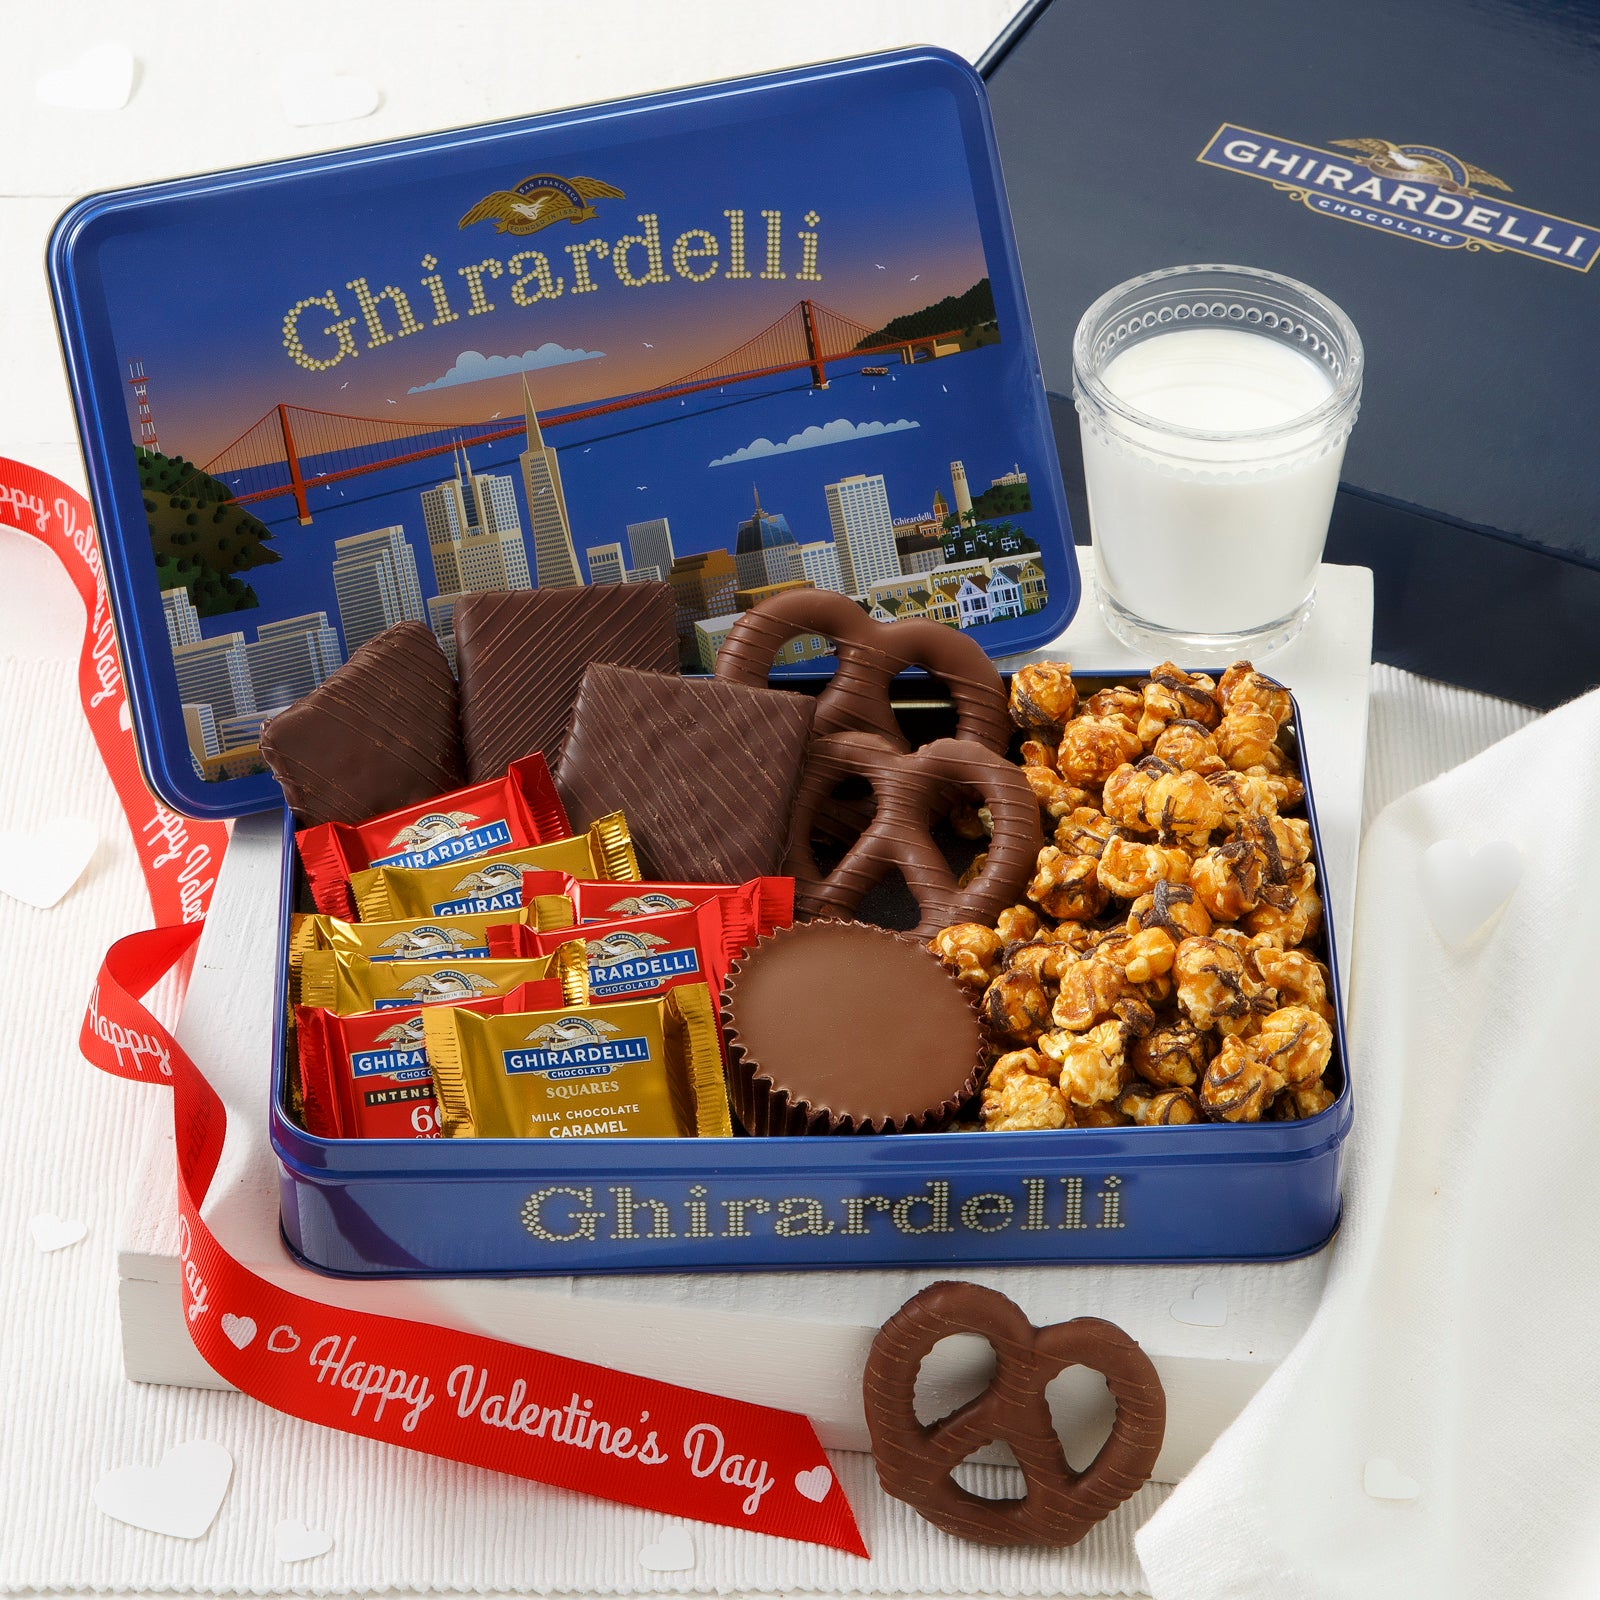 A blue Ghirardelli gift tin filed with an assortment of chocolates and treats